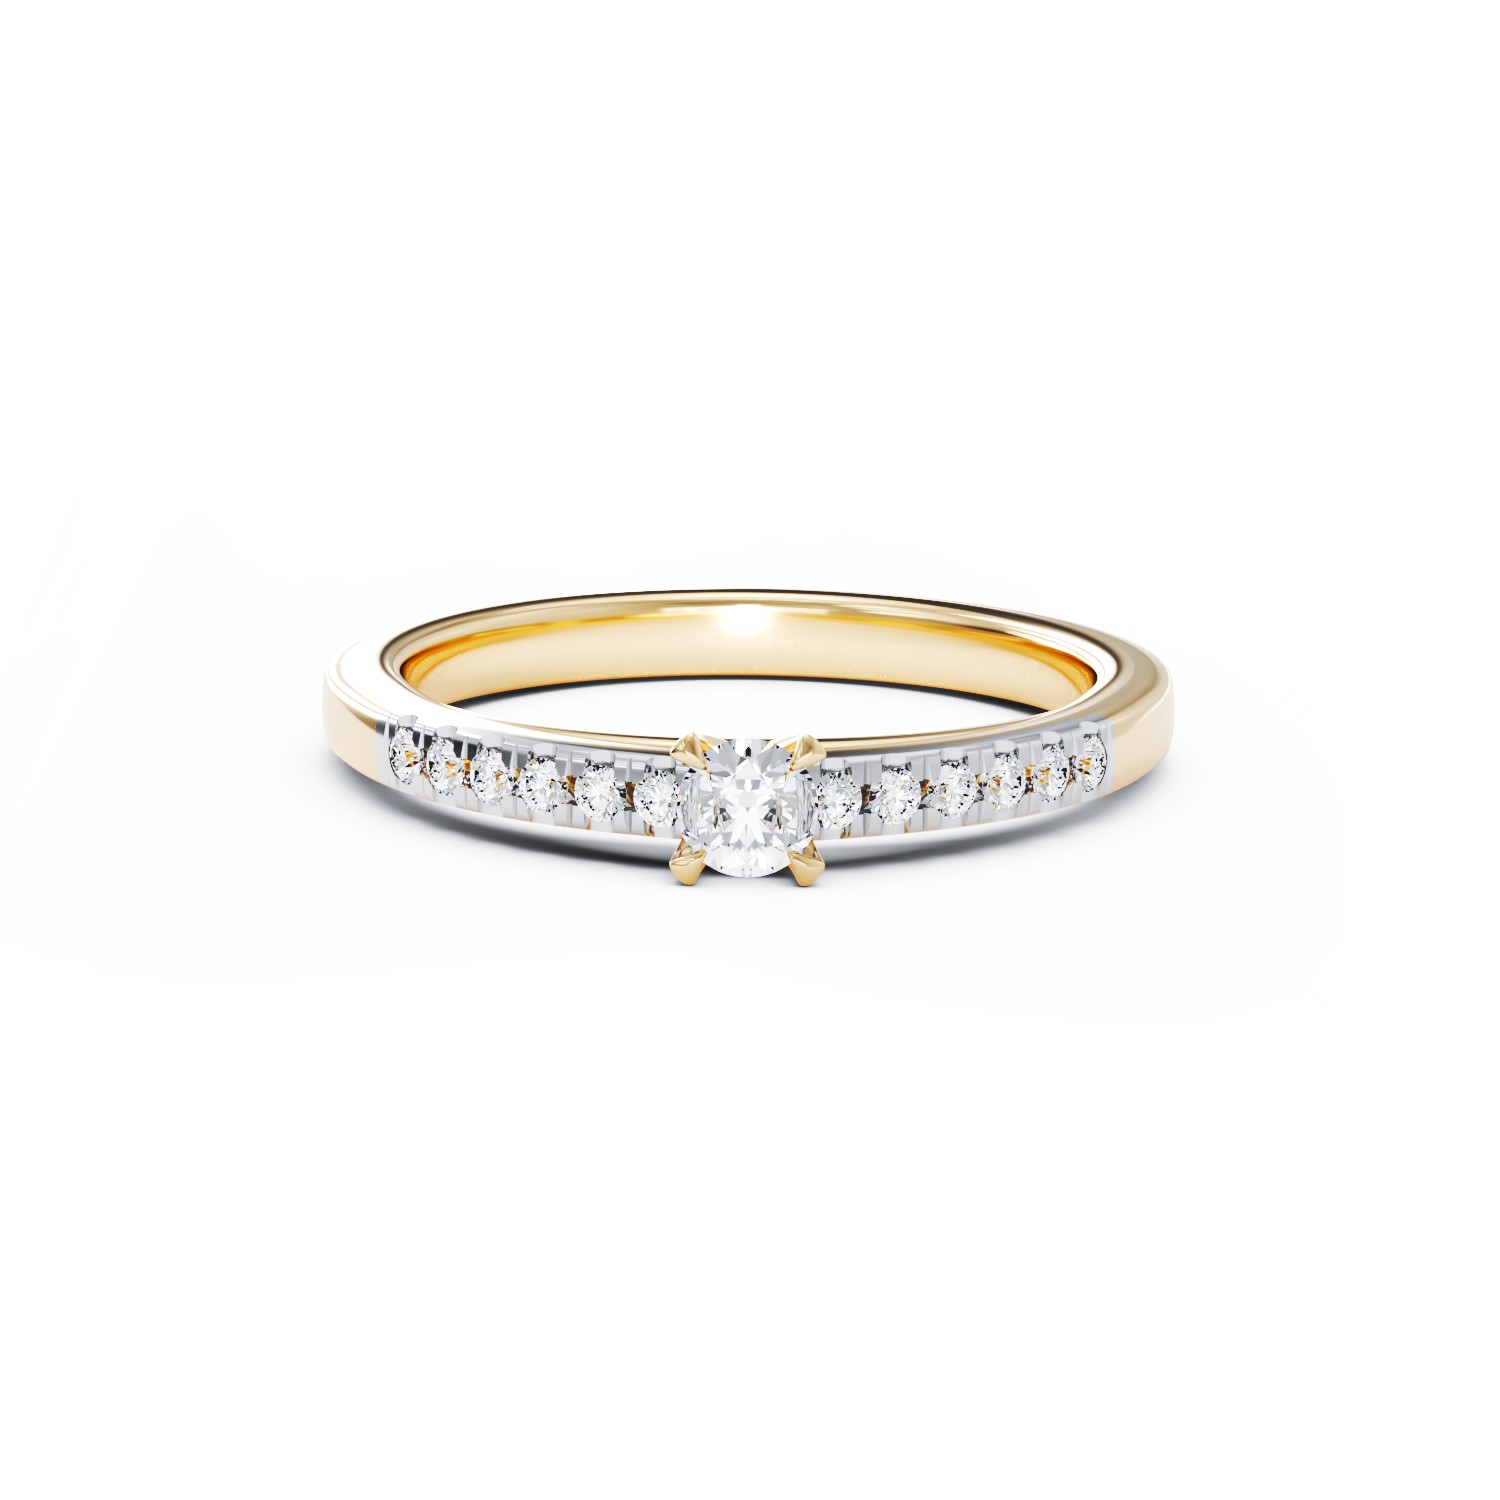 18K yellow gold engagement ring with 0.3ct diamond and 0.13ct diamonds